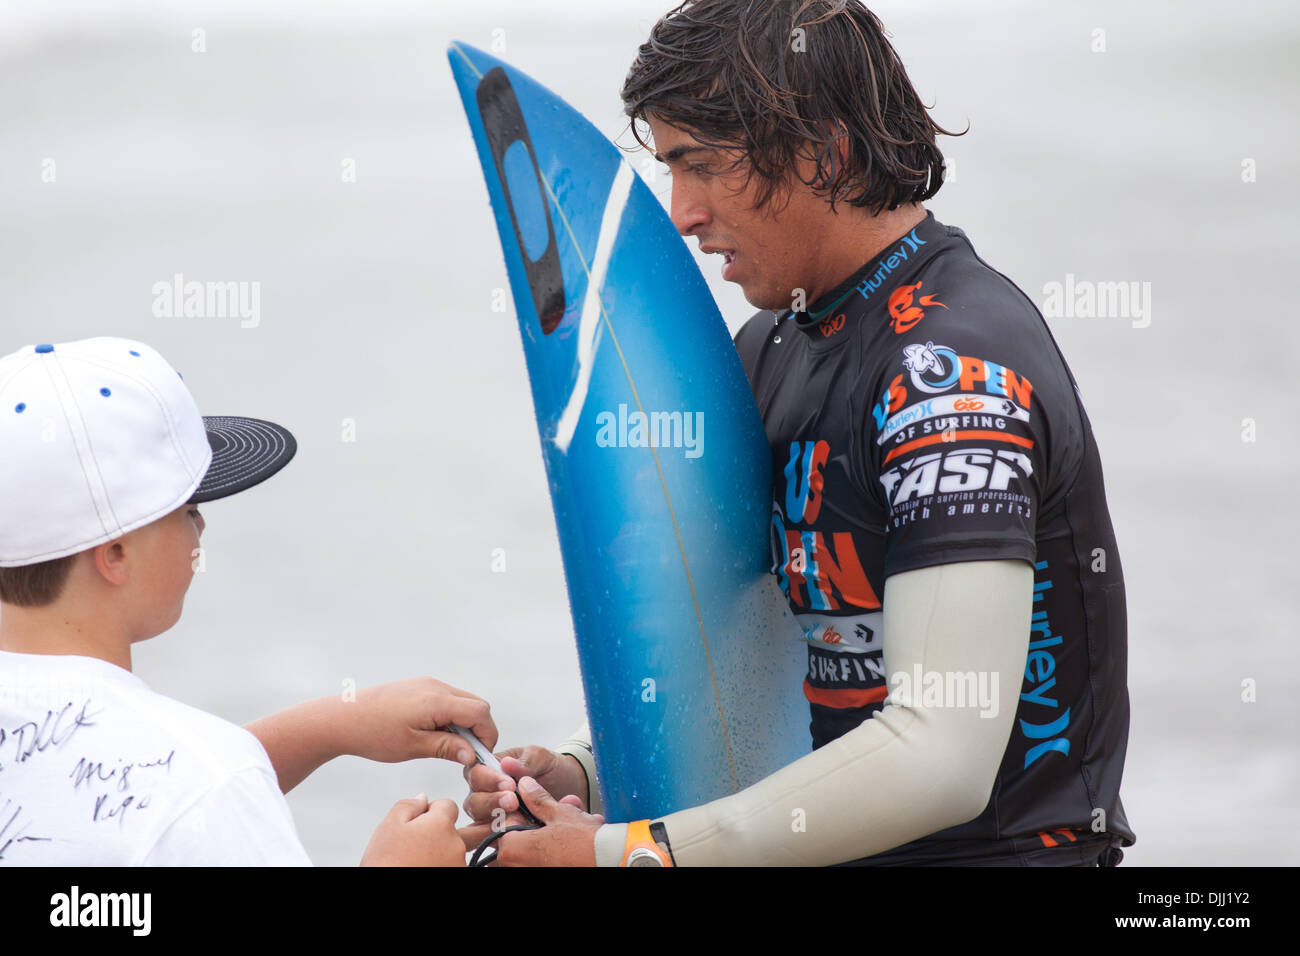 Aug. 06, 2010 - Huntington Beach, California, United States of America - 6 August 2010: Brazillian Miguel Pupo signs autographs for fans after his heat in Round 4 of Mens Surfing competetion at the US Open of Surfing in Huntington Beach, California.  Pupo won his heat and advances on to Round 5.  Mandatory Credit: Josh Chapel / Southcreek Global (Credit Image: © Southcreek Global/Z Stock Photo